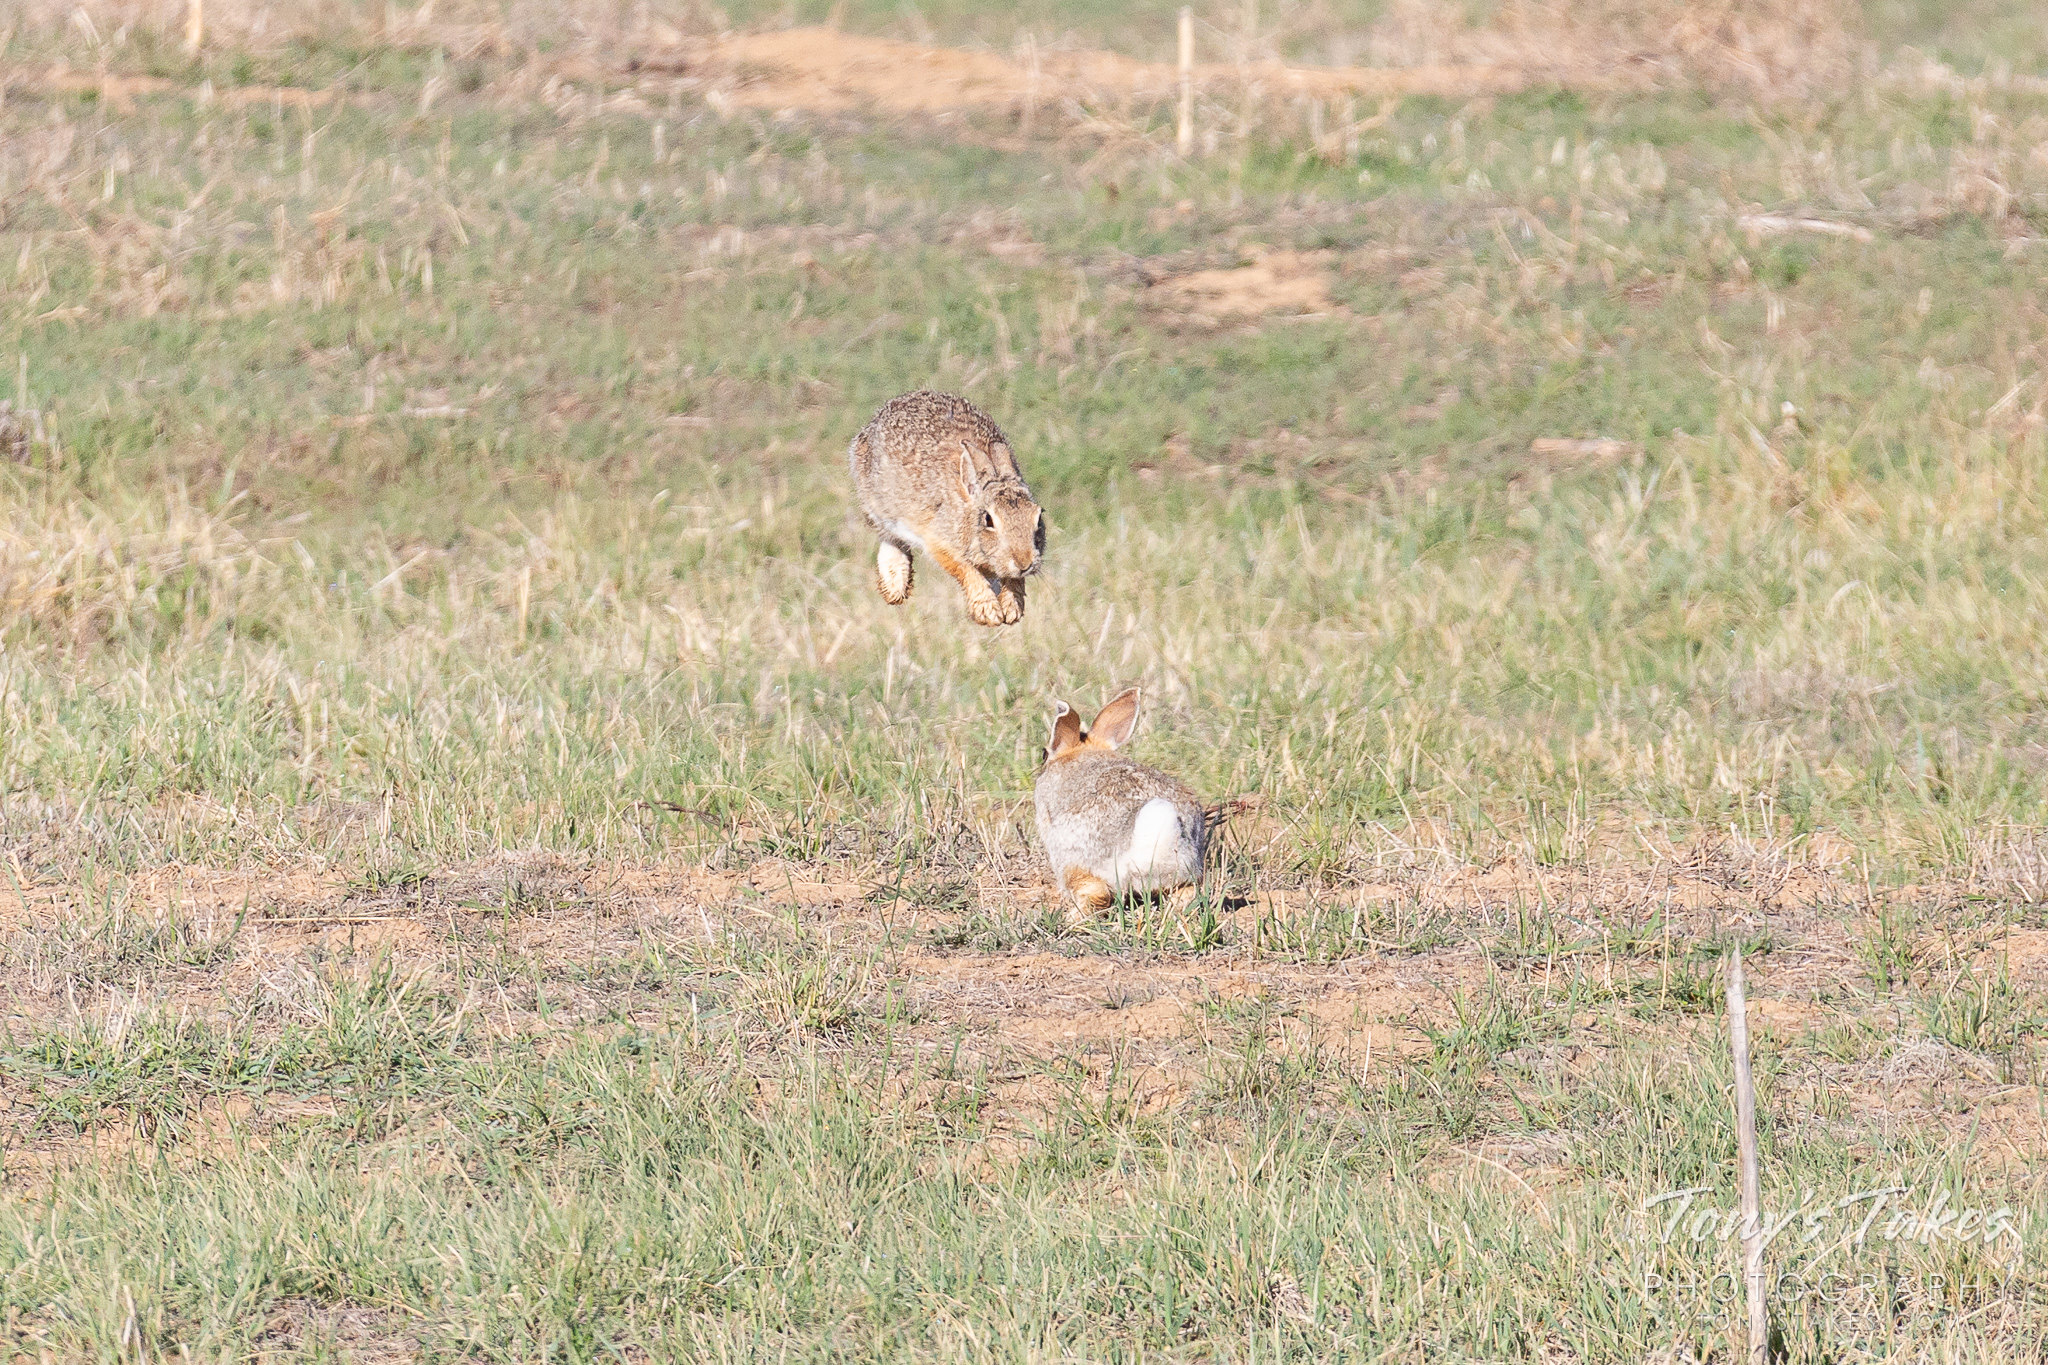 Rabbits bounce around each other in a courtship display. (© Tony's Takes)